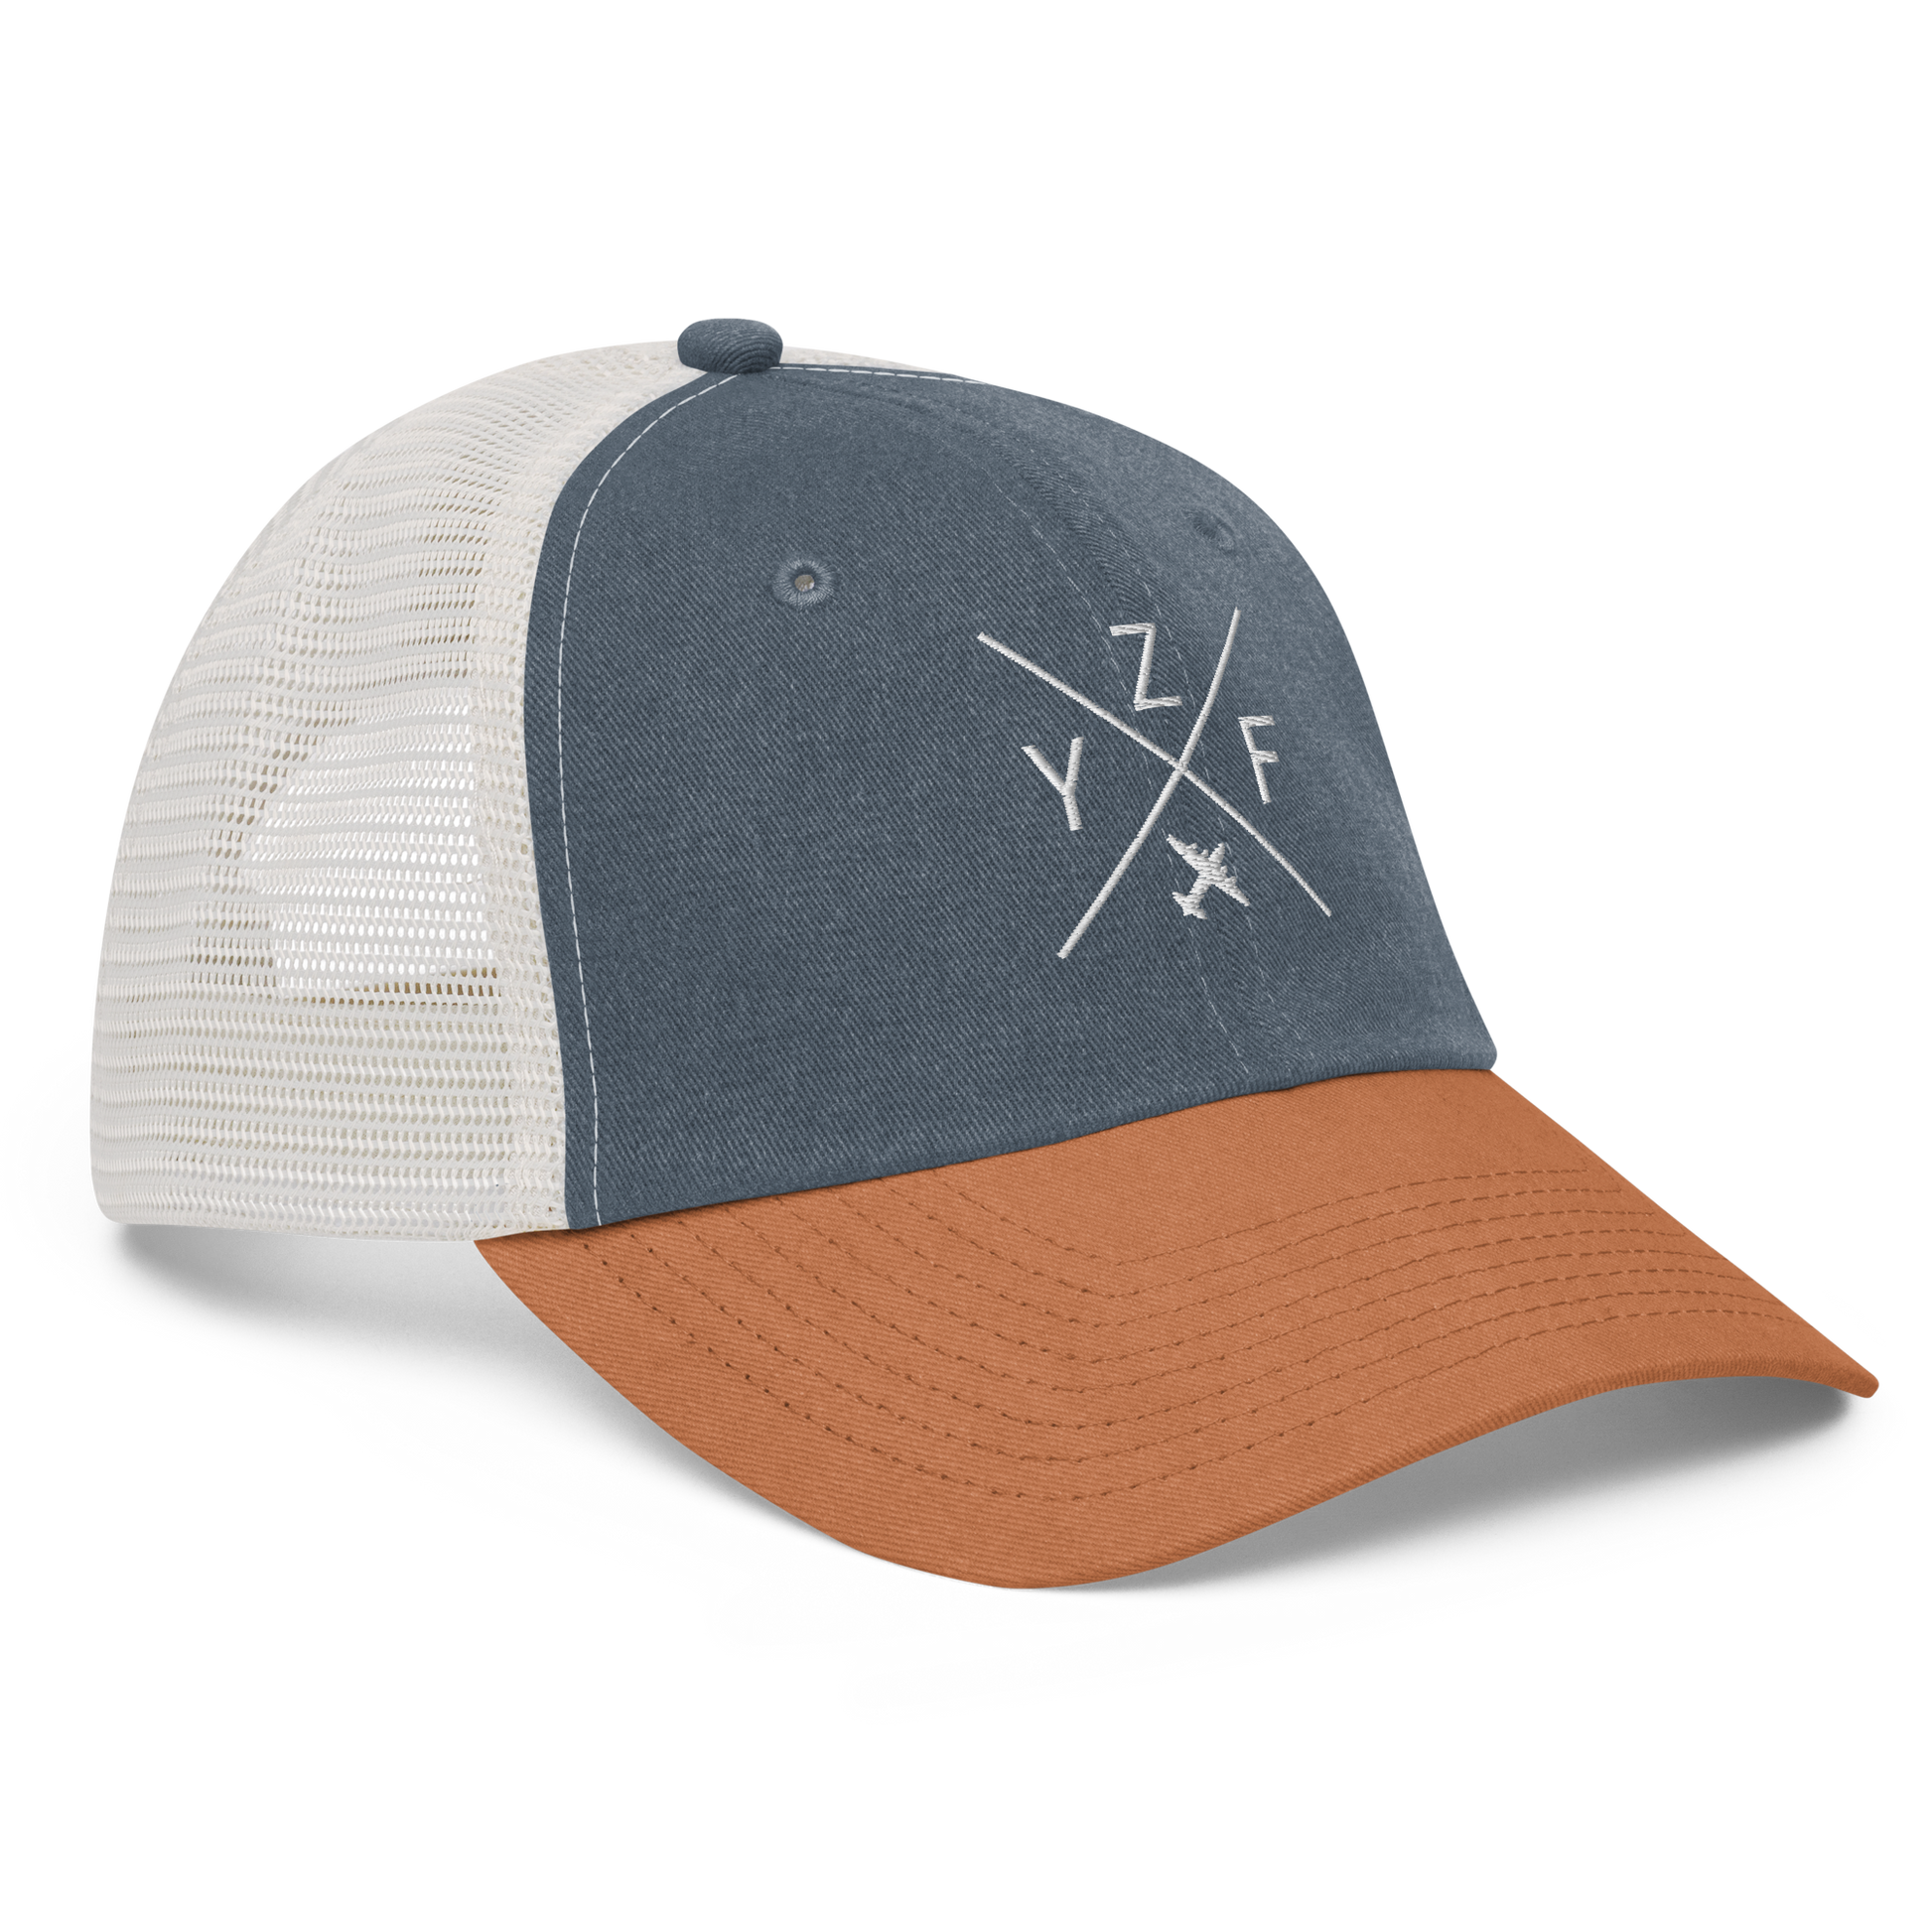 Crossed-X Pigment-Dyed Trucker Cap • YZF Yellowknife • YHM Designs - Image 16